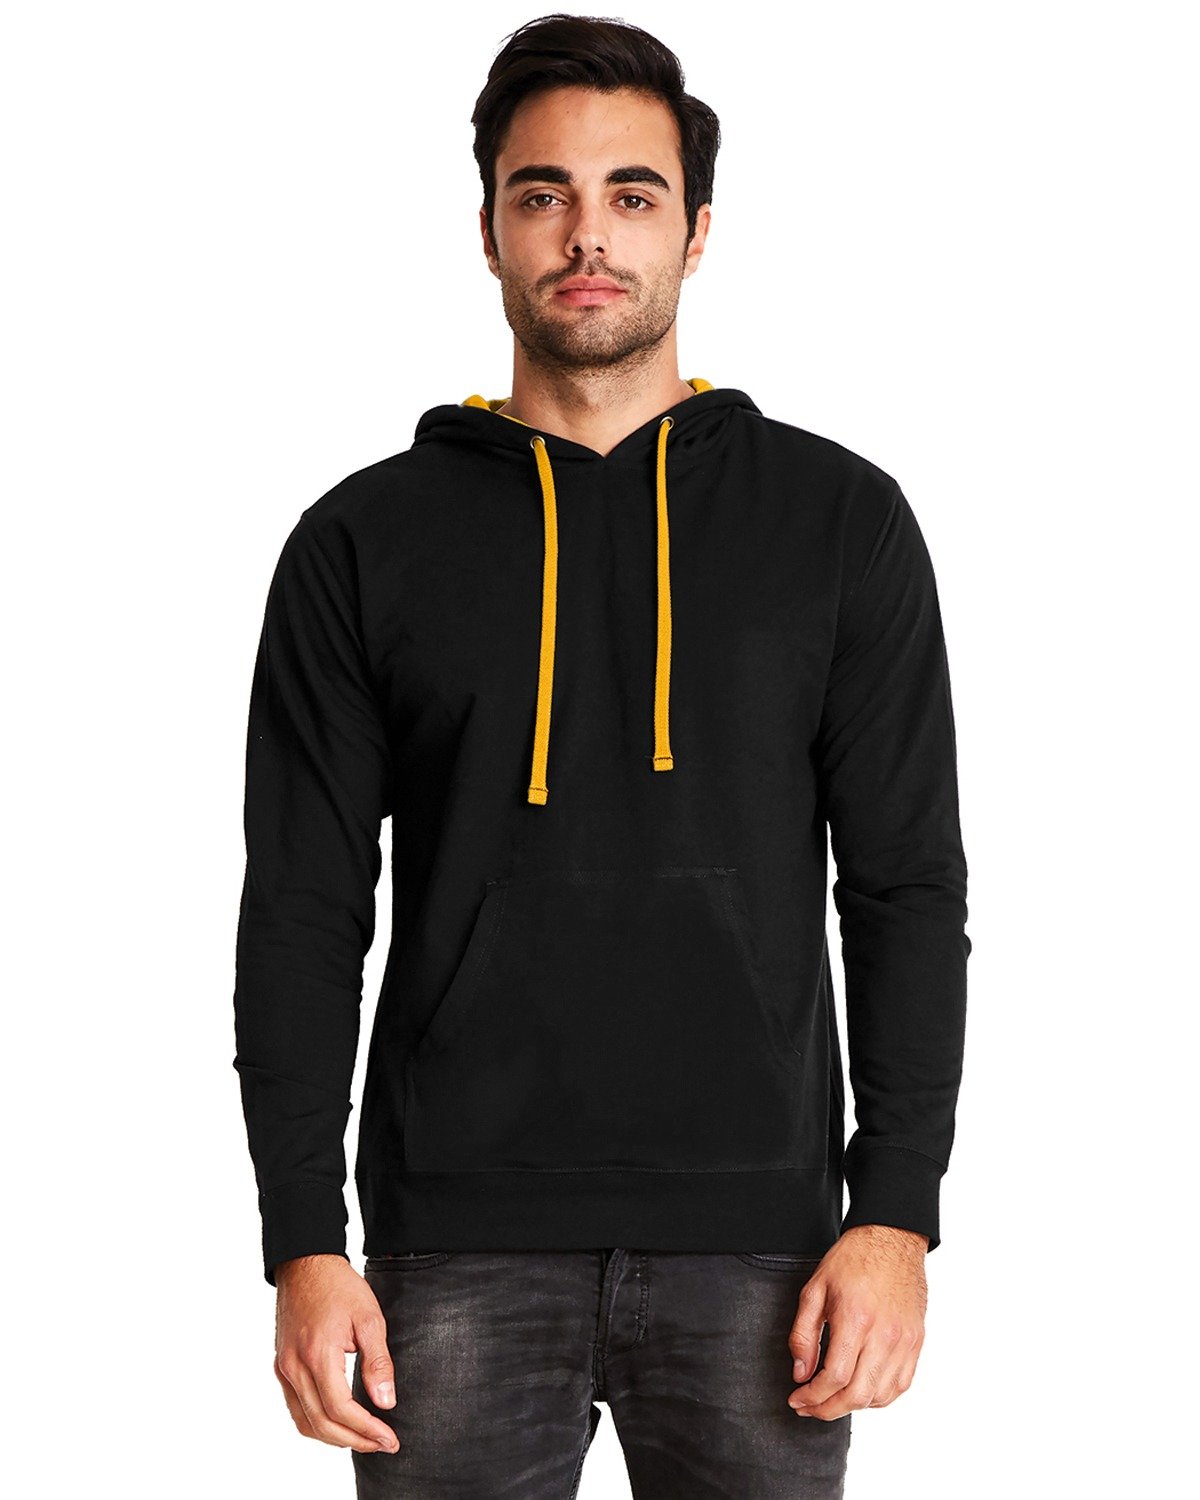 Next Level Apparel Unisex French Terry Pullover Hoodie BLACK/ GOLD 